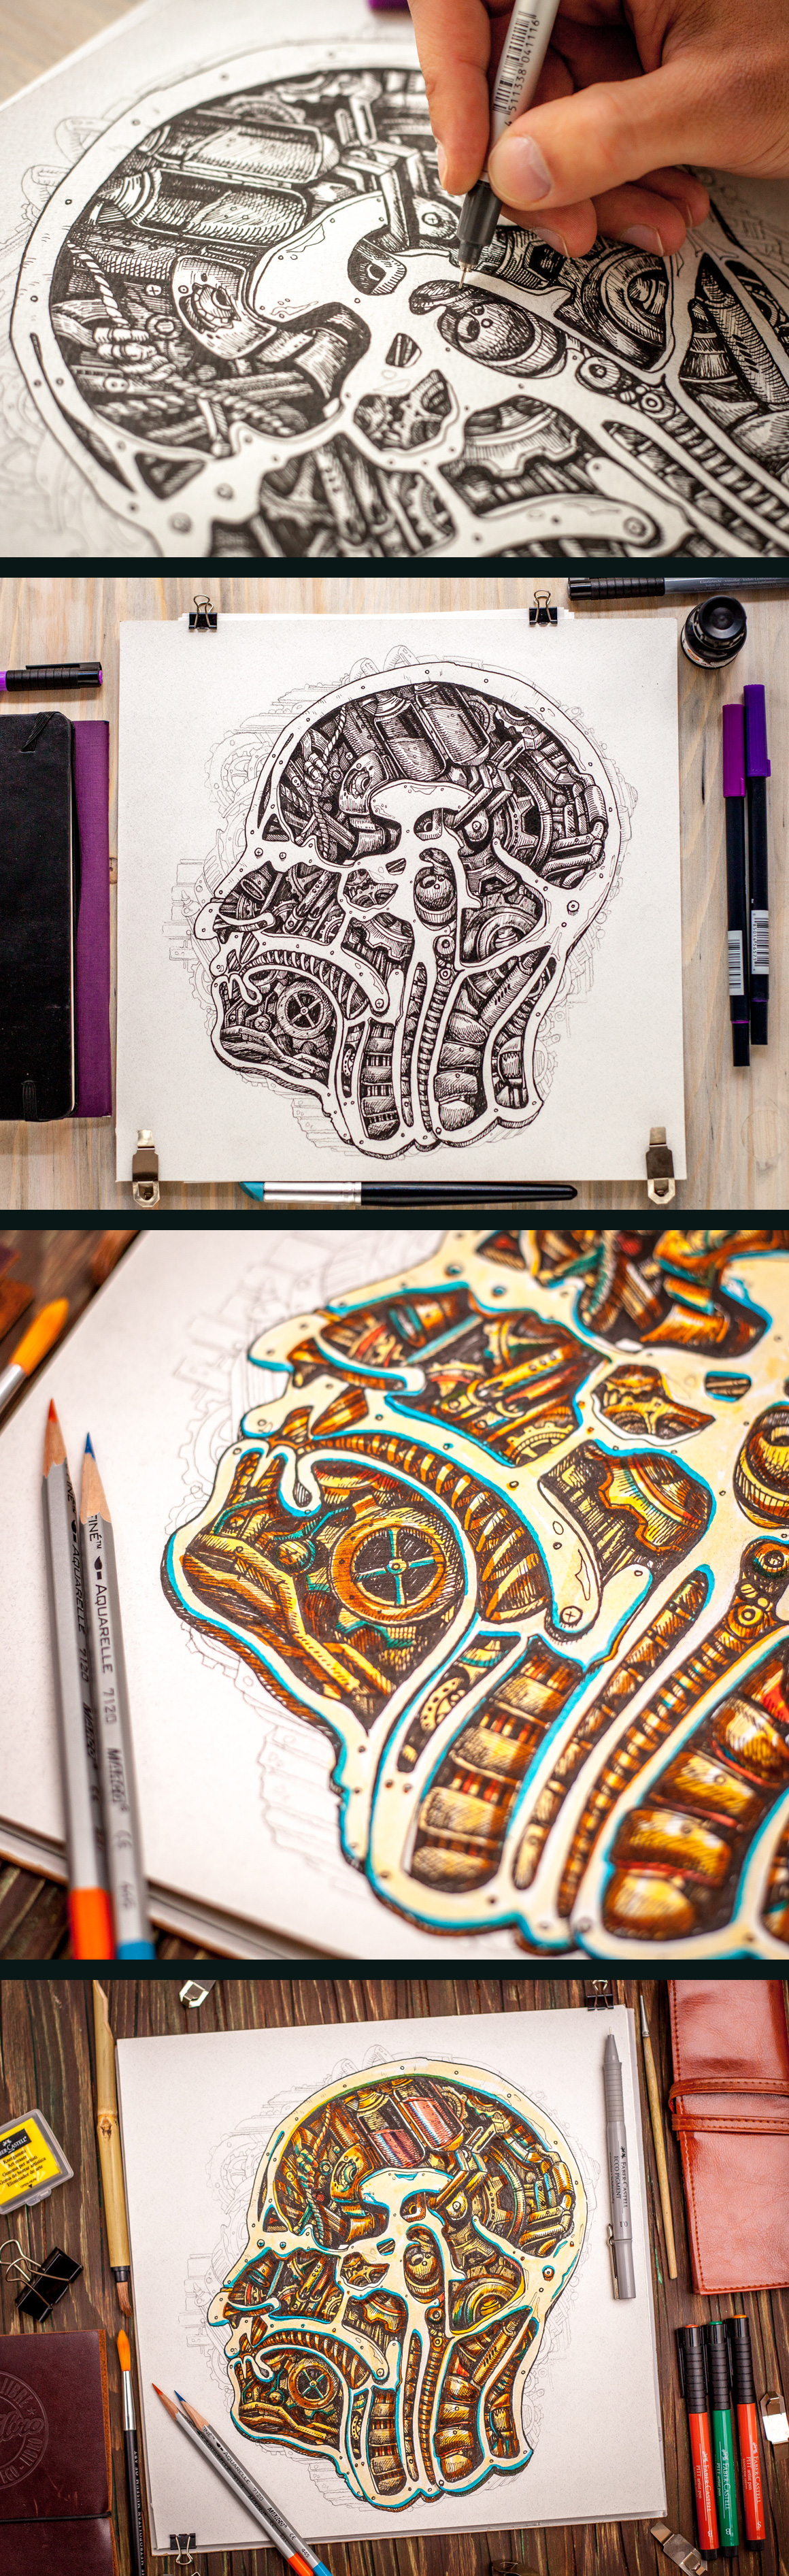 graphic liners sketch STEAMPUNK process head card Character tattoo hobbit Rhino monster doodle letter art